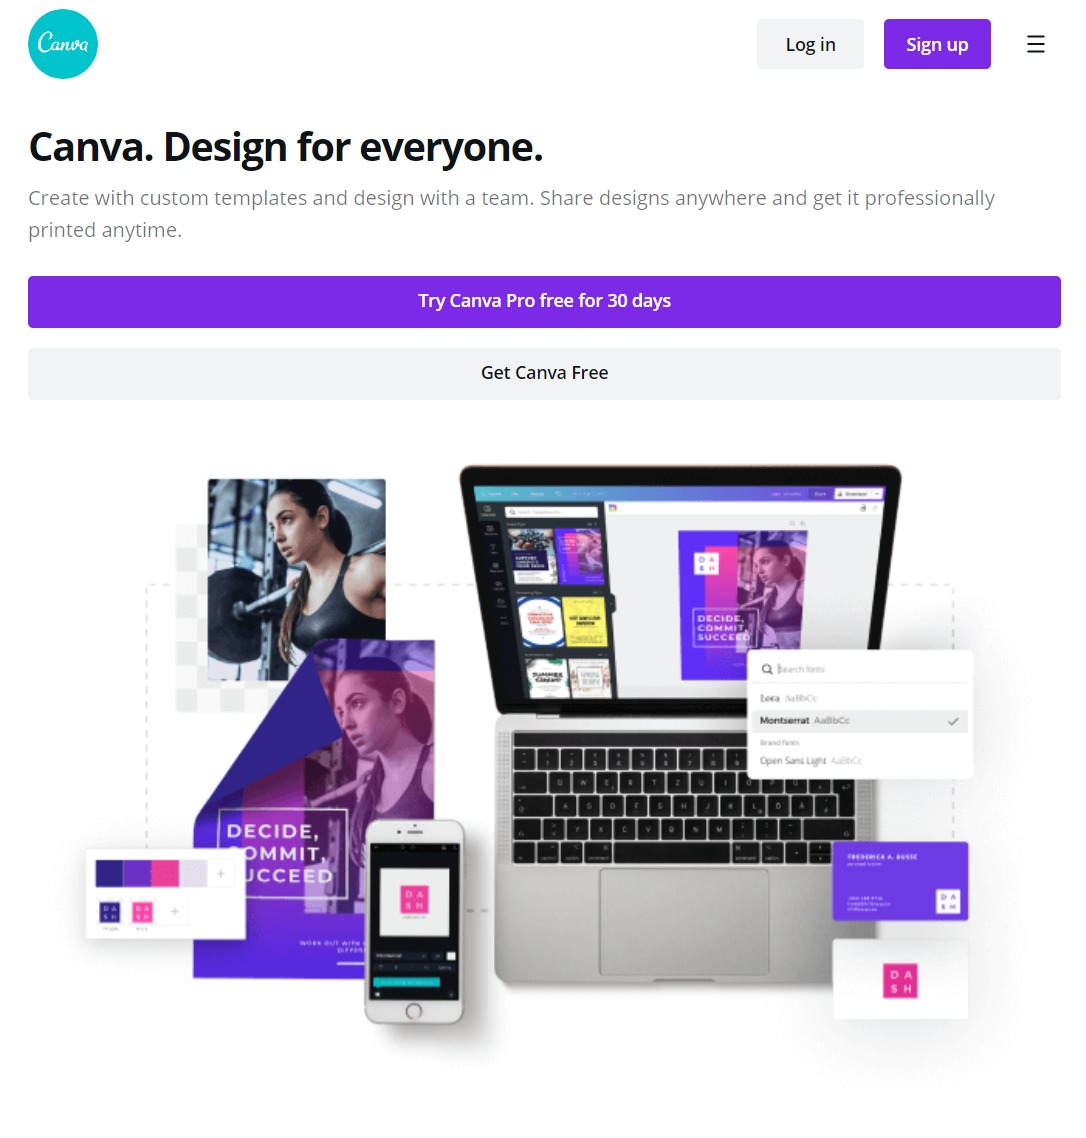 Canva-Pro-An-Online-Graphic-Design-Tool-Try-Canva-Pro-Free